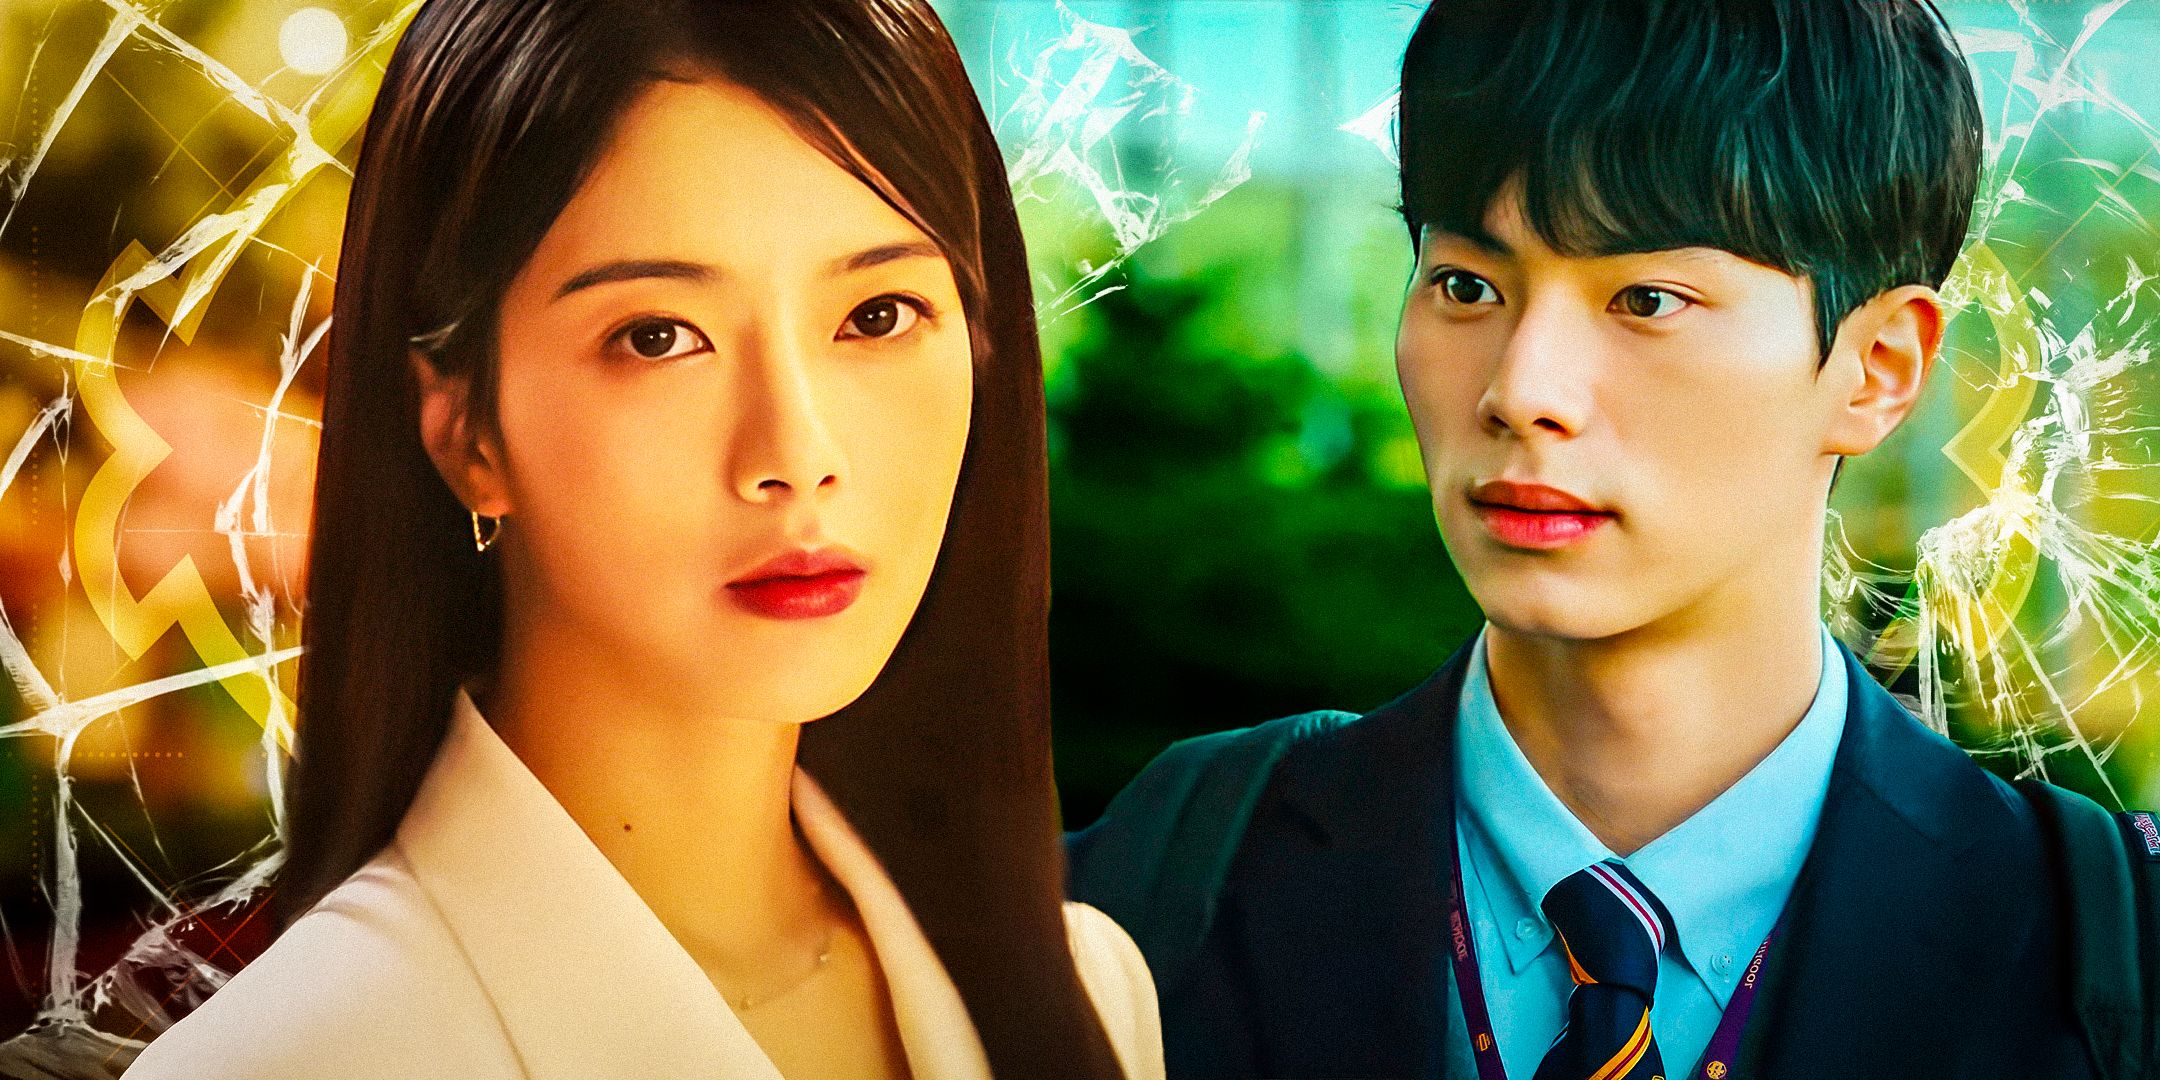 Roh Jeong-eui as Jung Jae-i and Lee Chae-min as Kang Ha in Hierarchy